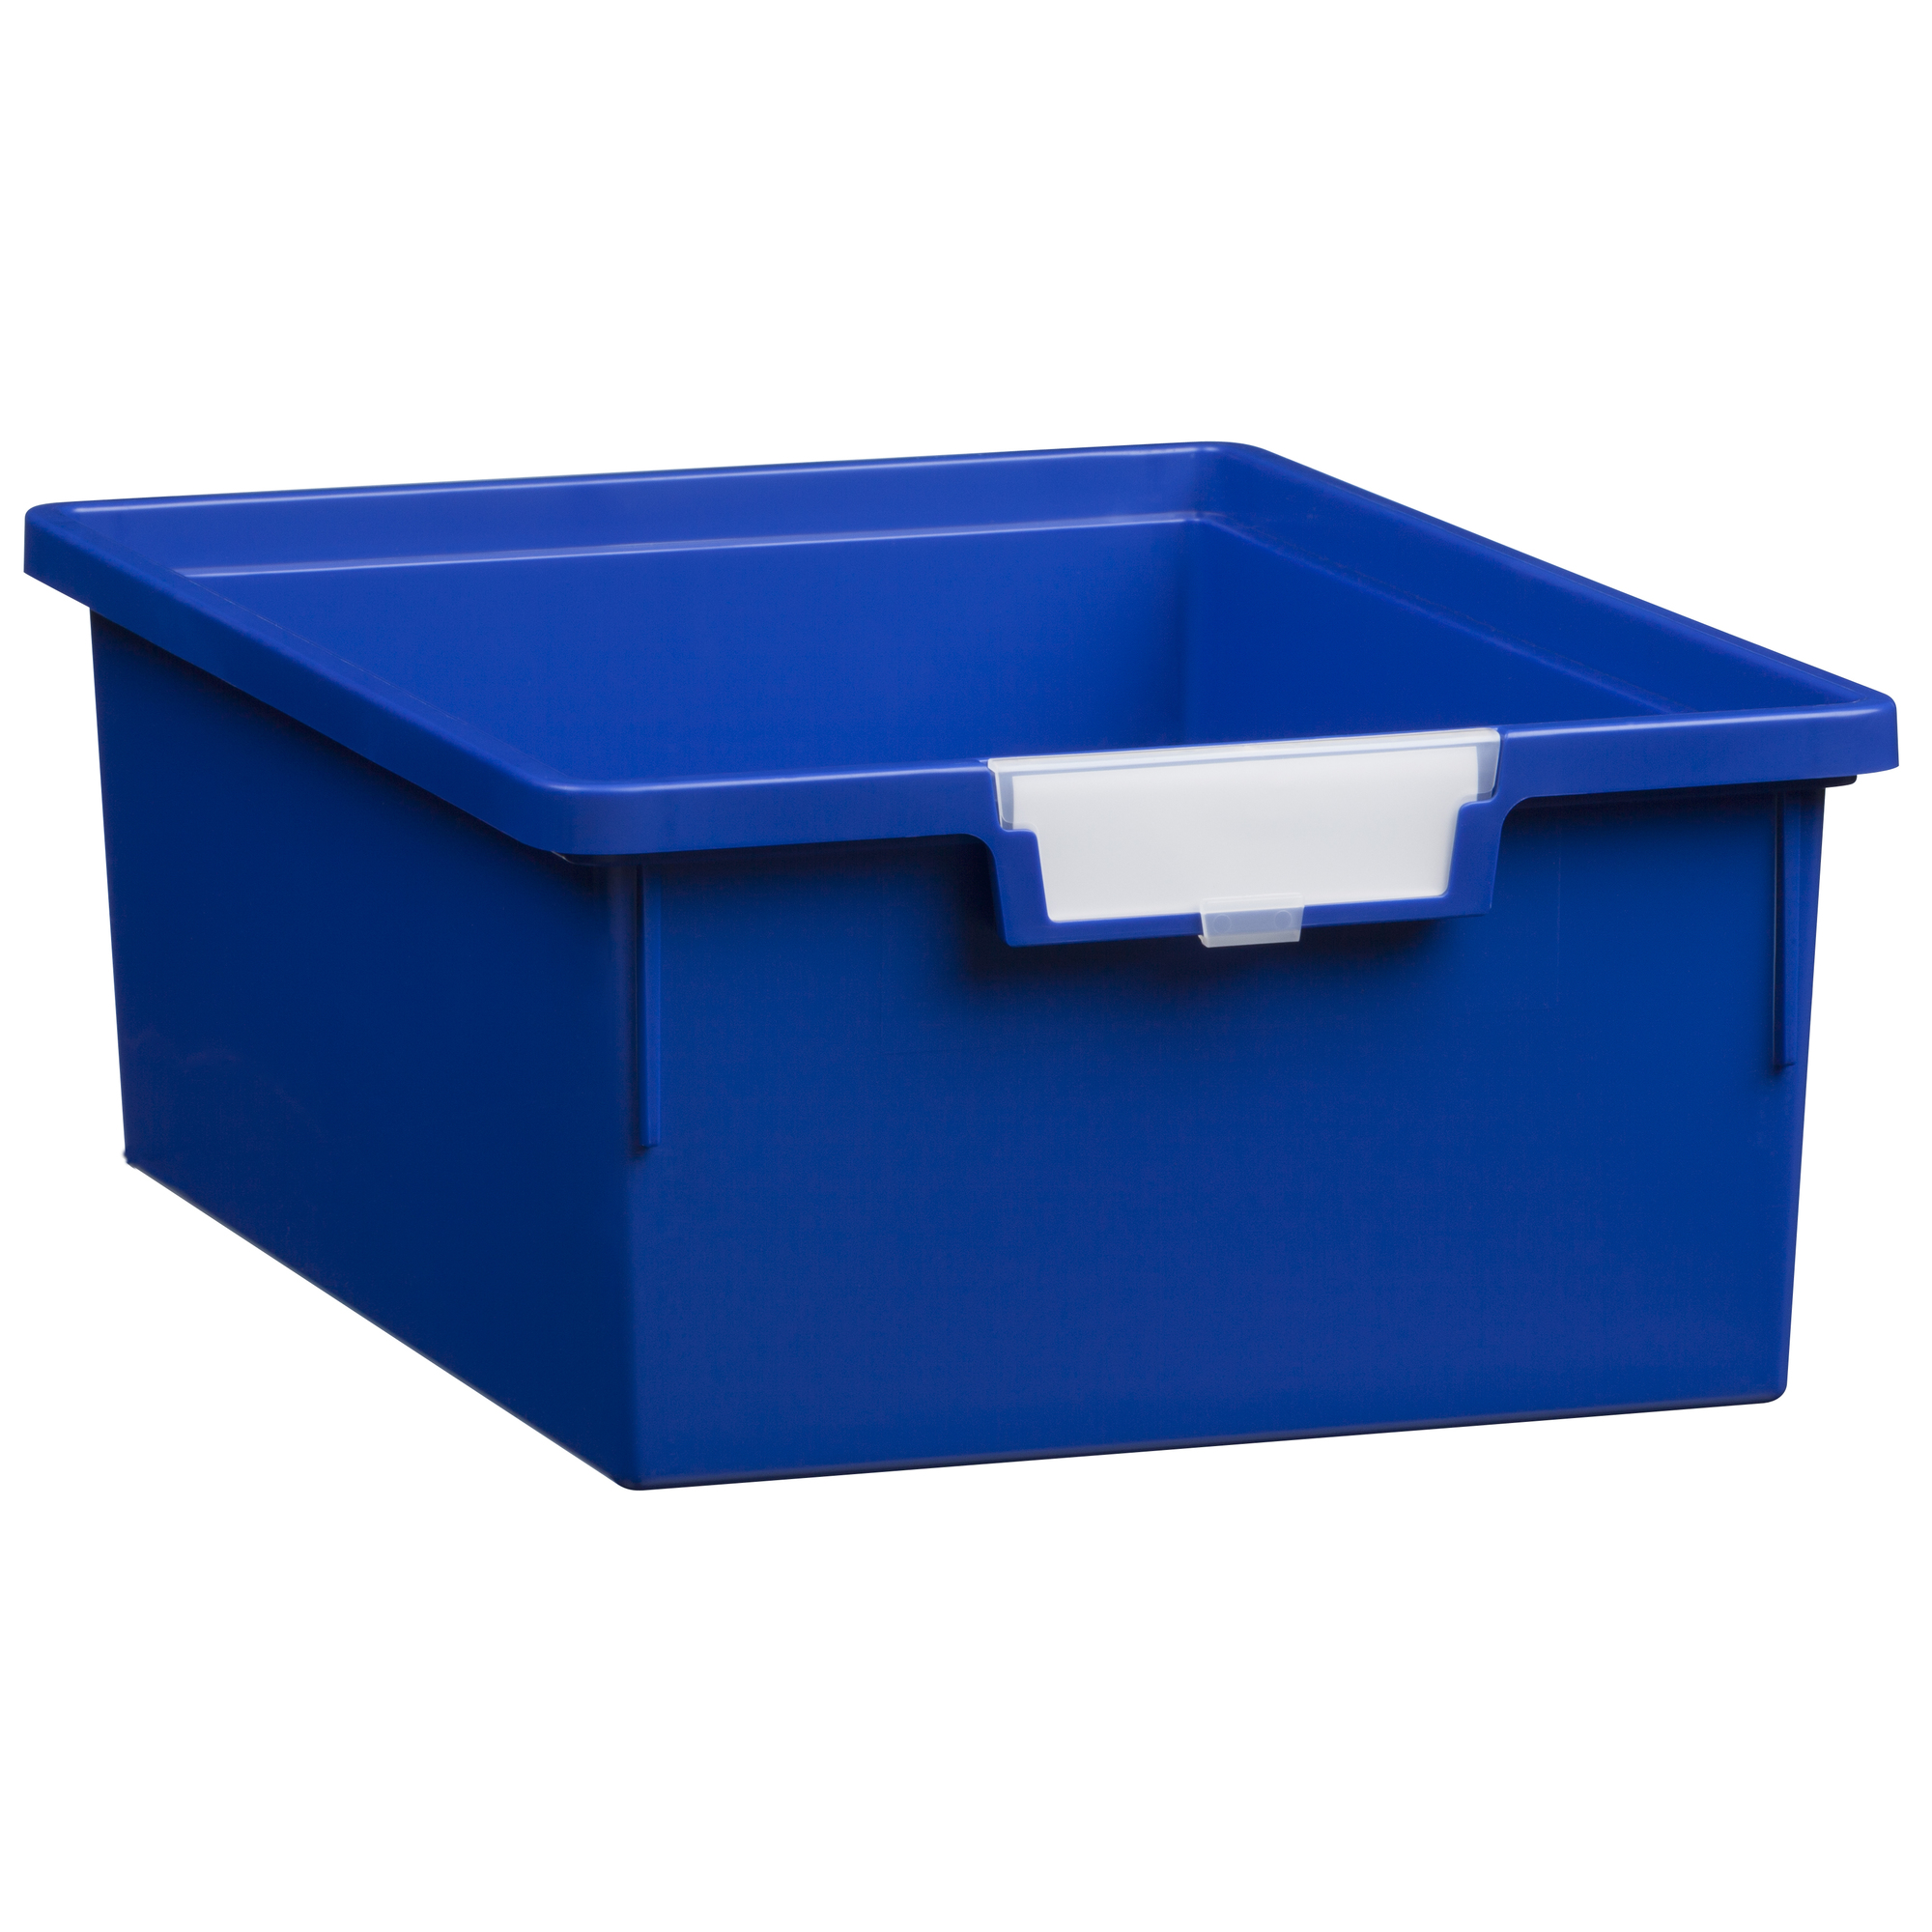 Certwood StorWerks, Slim Line 6Inch Tray in Primary Blue-1PK, Included (qty.) 1 Height 6 in, Model CE1952PB1